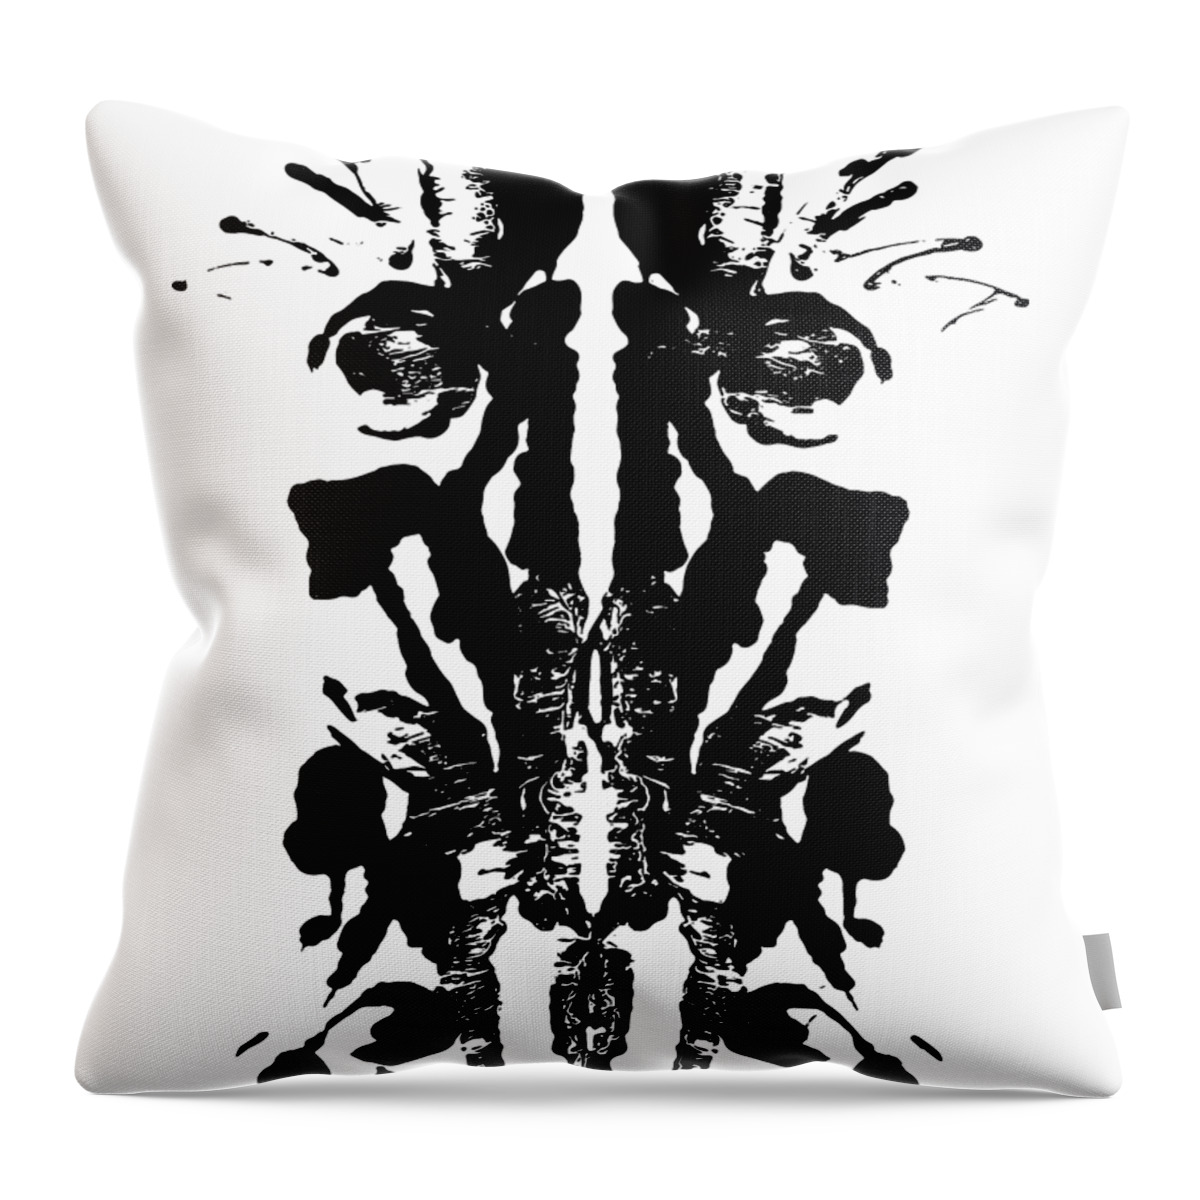 Abstract Throw Pillow featuring the painting Liminal Lobster by Stephenie Zagorski